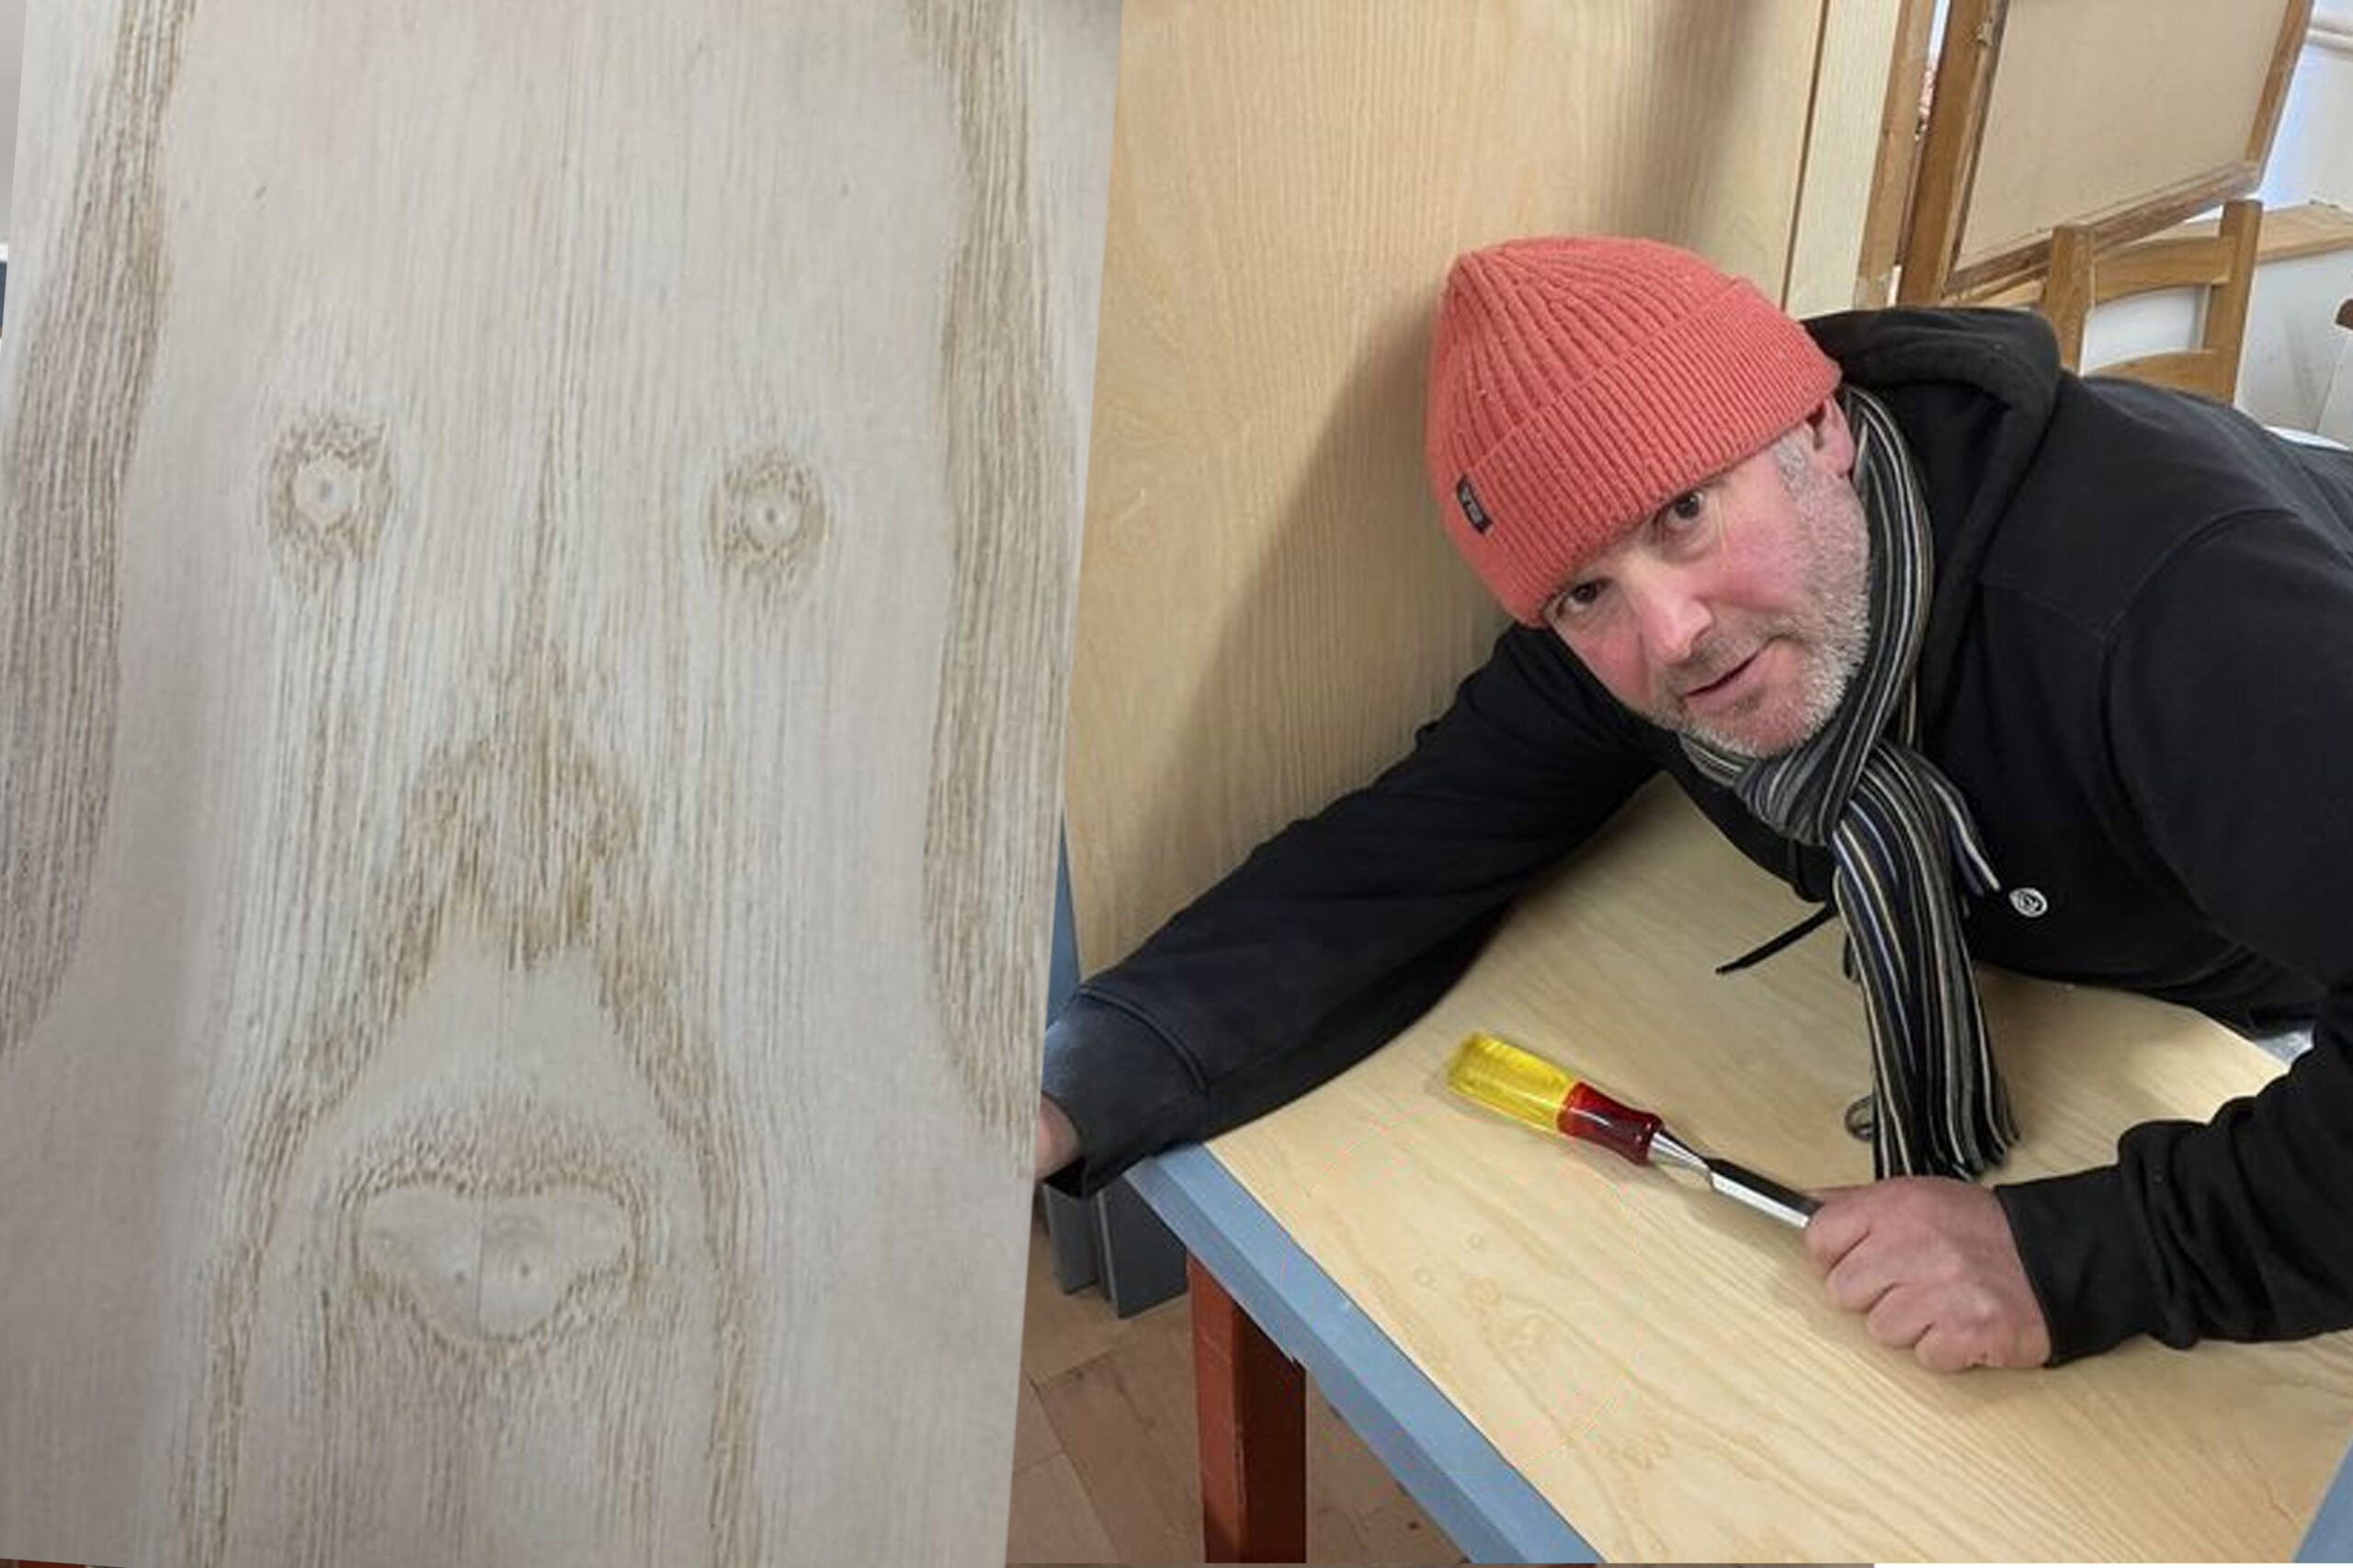 A Carpenter Thinks He Found Jesus' Face in a Cupboard - RELEVANT